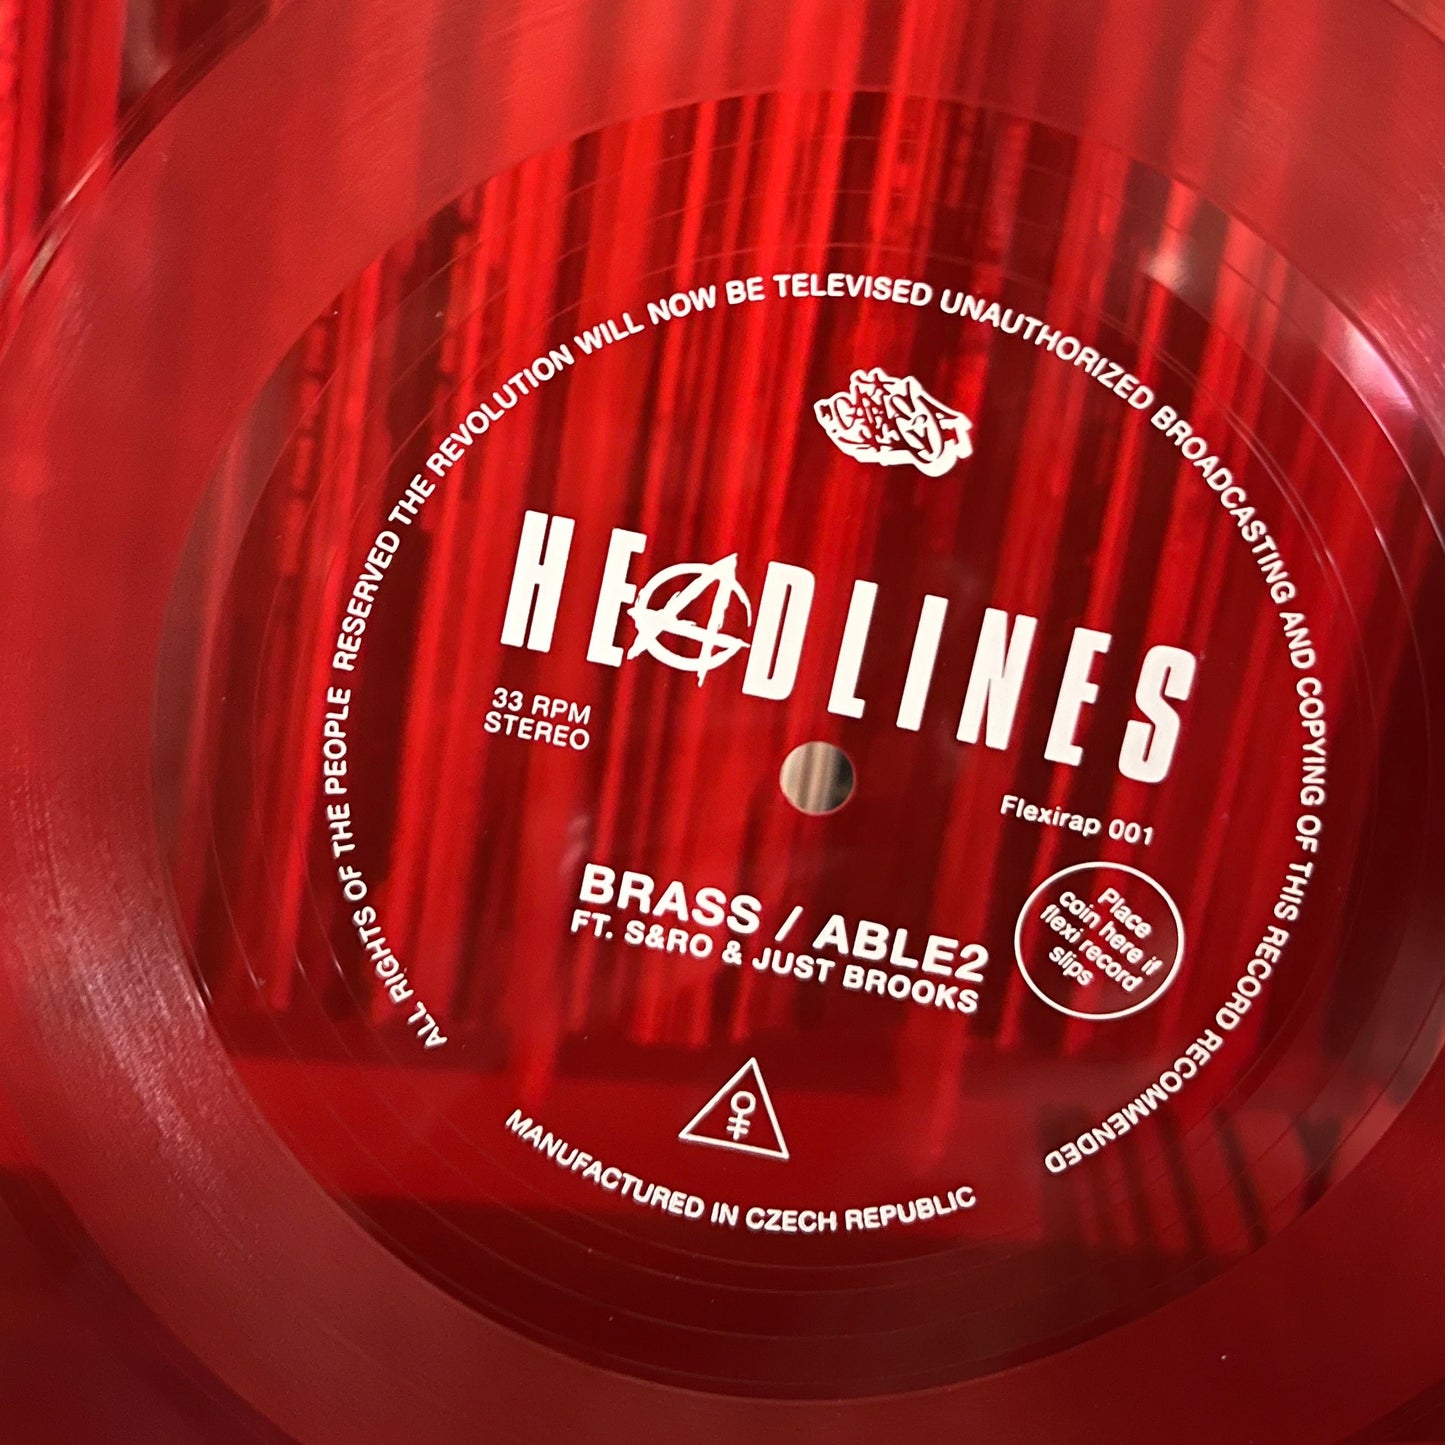 Headlines (feat. S&RO & Just Brooks) - Able2, Brass - 7" Blood Red Flexi Disc